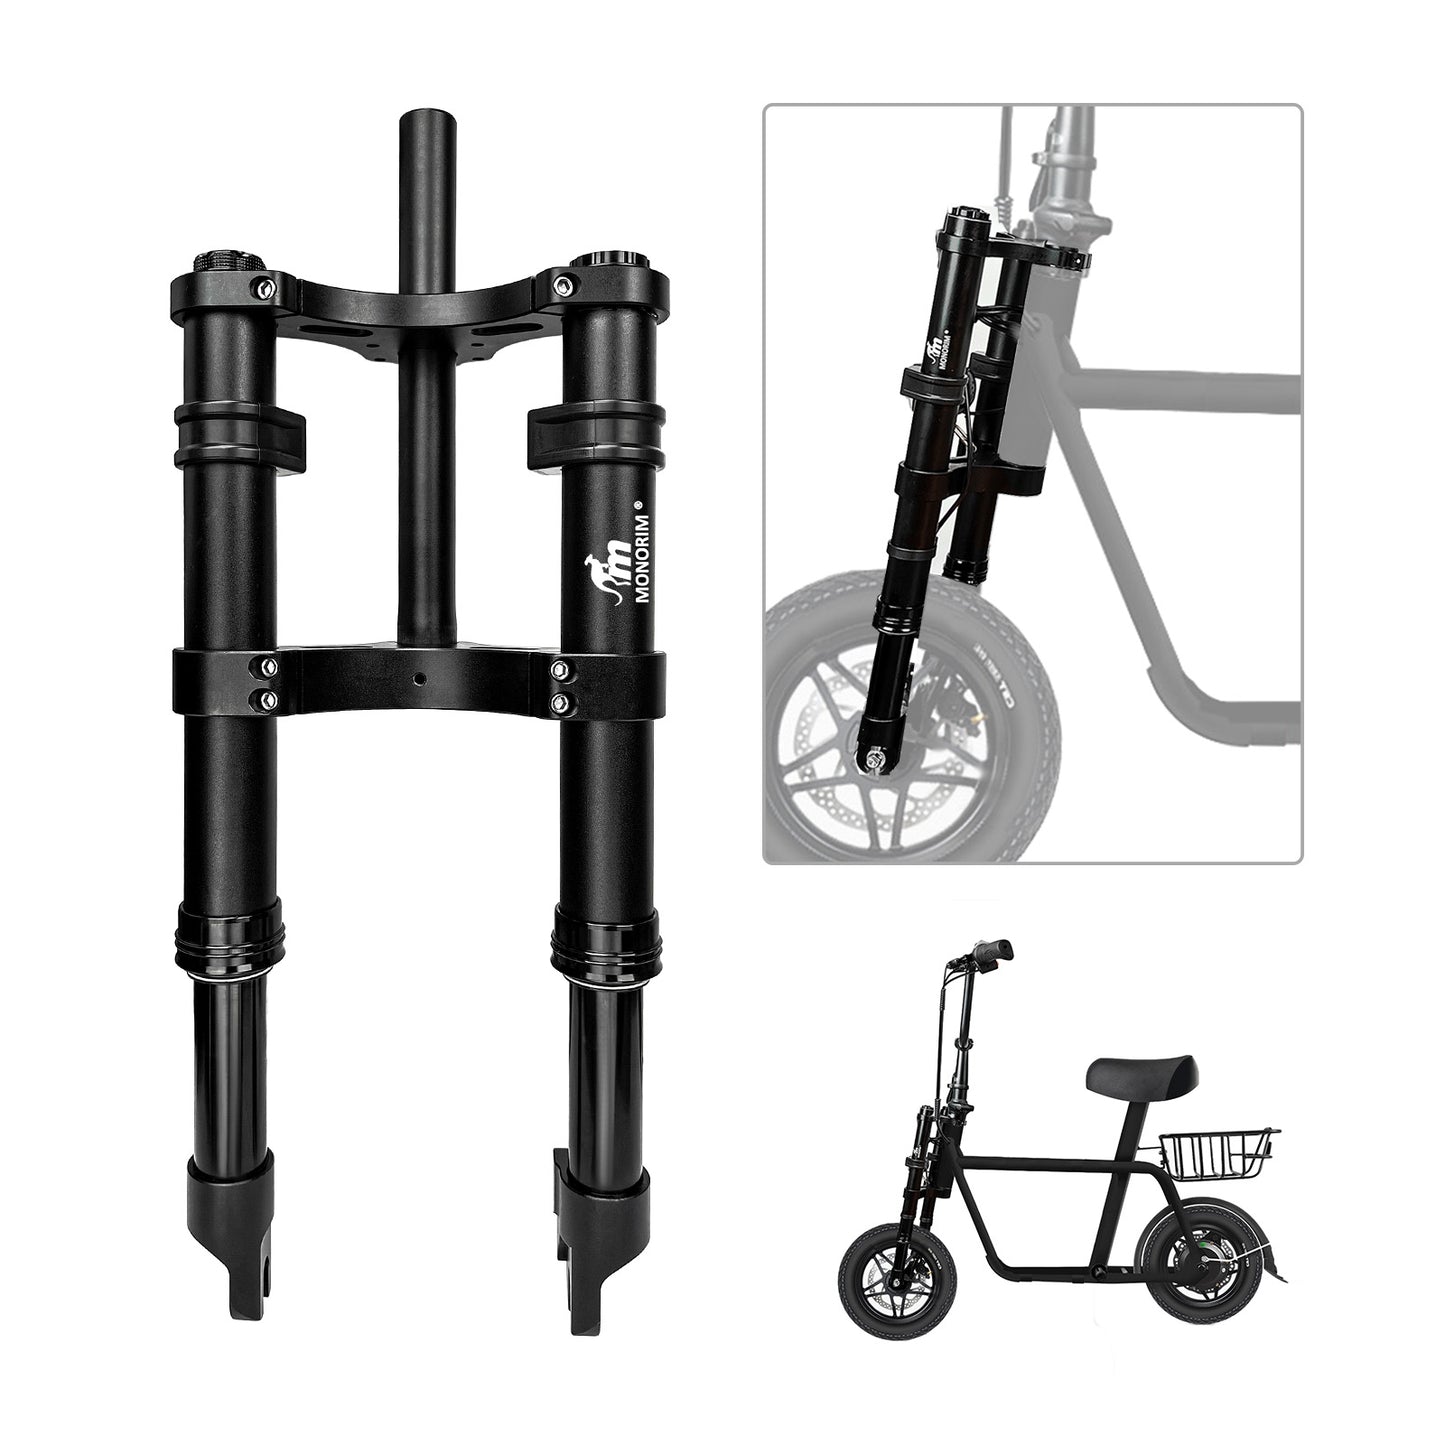 Monorim MB0-12inch front air suspension modify great kit to be more safety and comfort for FIIDO Q1/ Q1S ebike